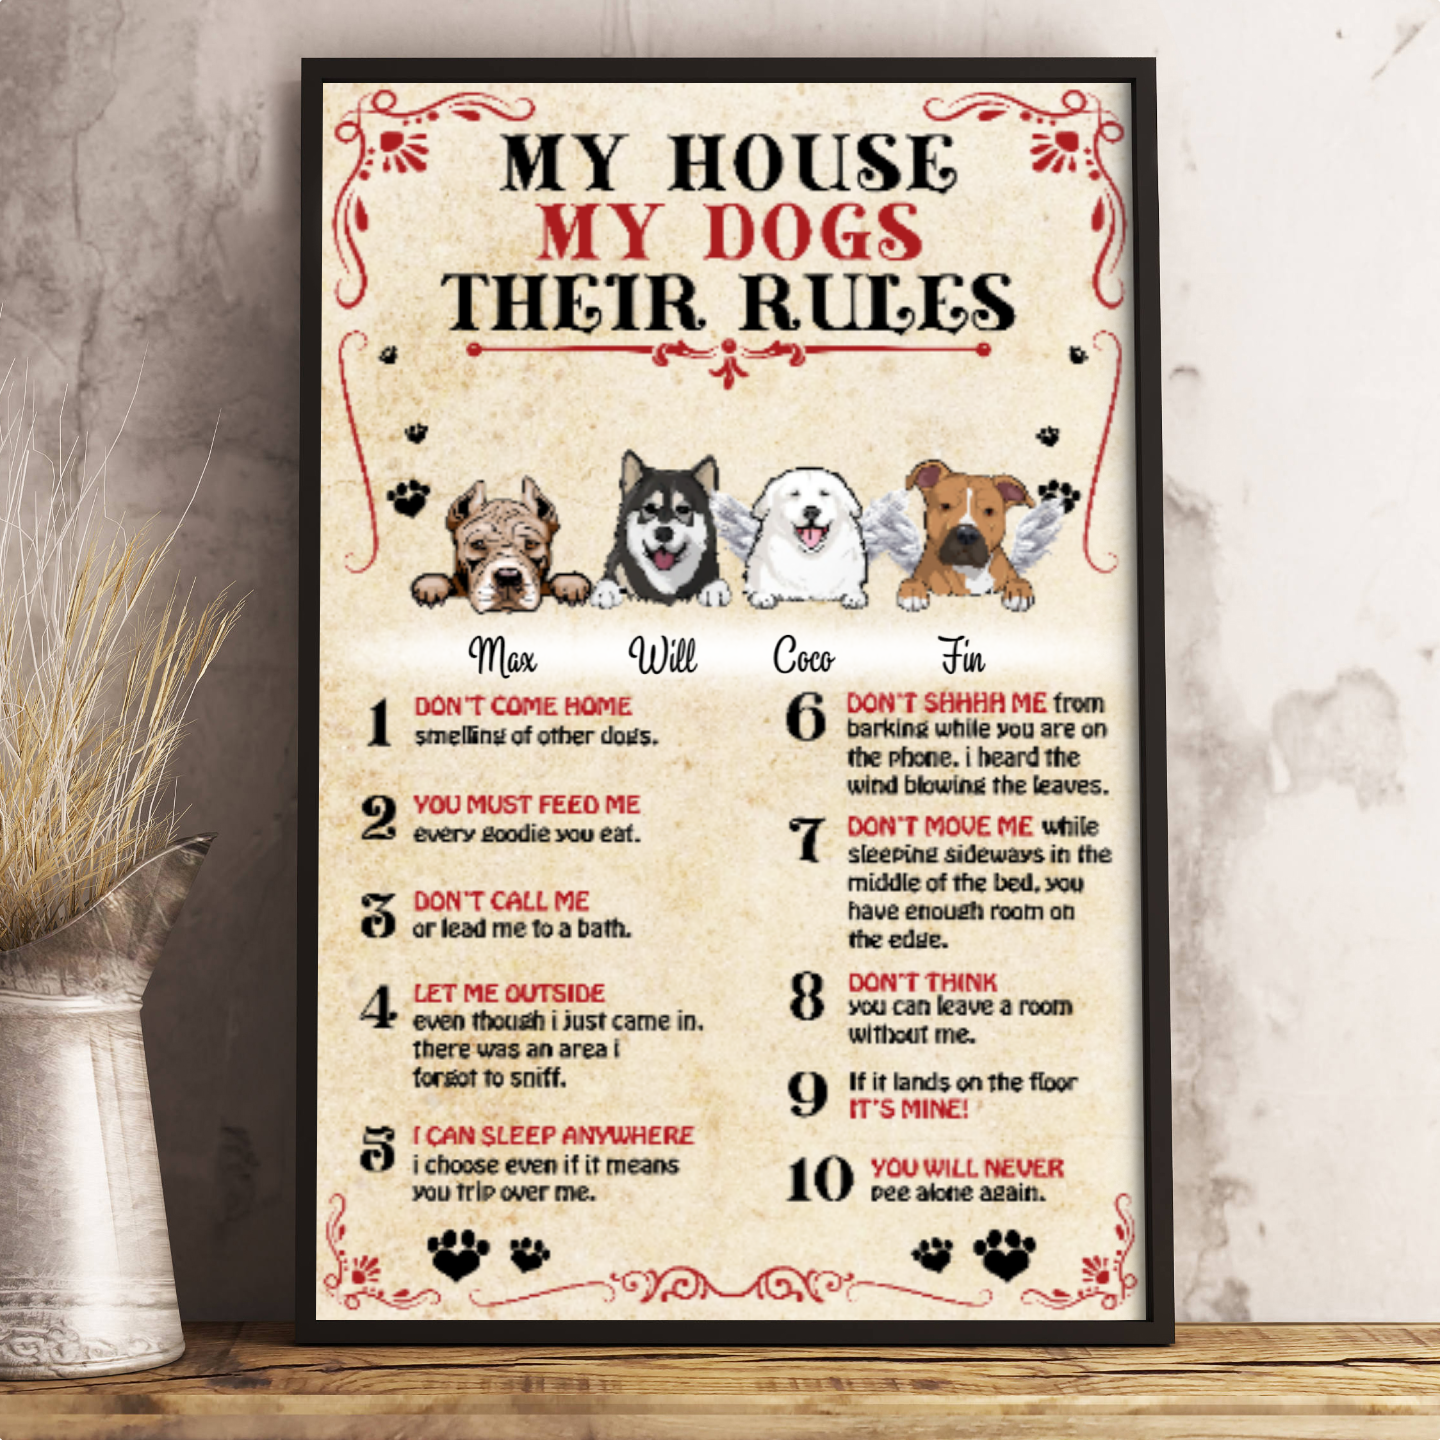 Ciaocustom Poster/Framed Canvas/Unframed Canvas, Custom Dog Breeds/Name/Background/Text, My house my dogs their rules - Choose up to 4 Dogs